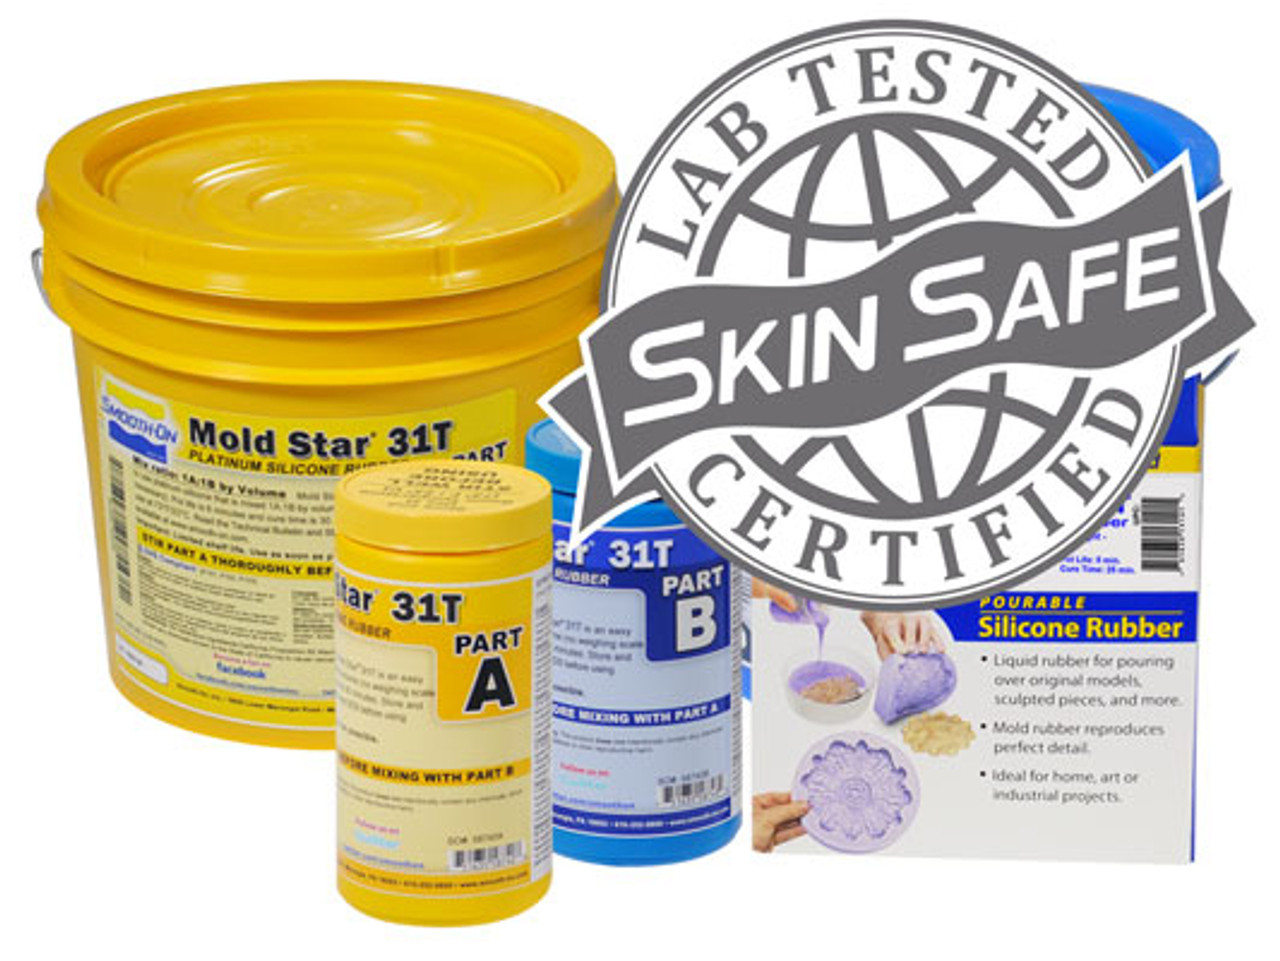 Mold Star 30 Platinum Cure Silicone Rubber - Sculpture Supply